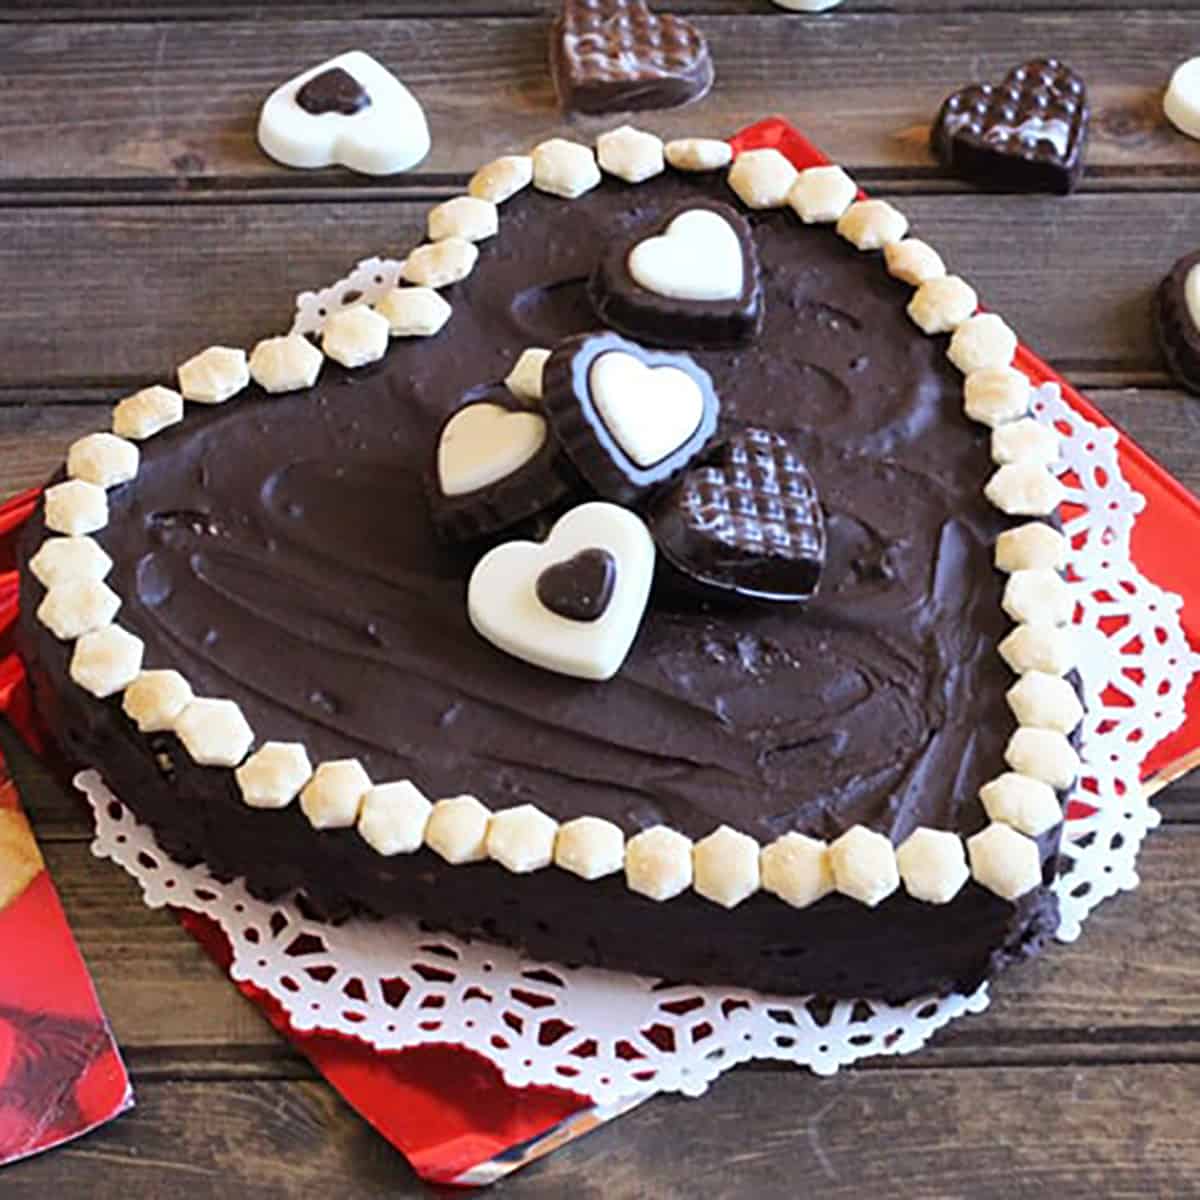 No Bake Chocolate Biscuit Cake | Lazy Cake | Heart-Shaped Cake | Queen Elizabeth's Favorite Cake.